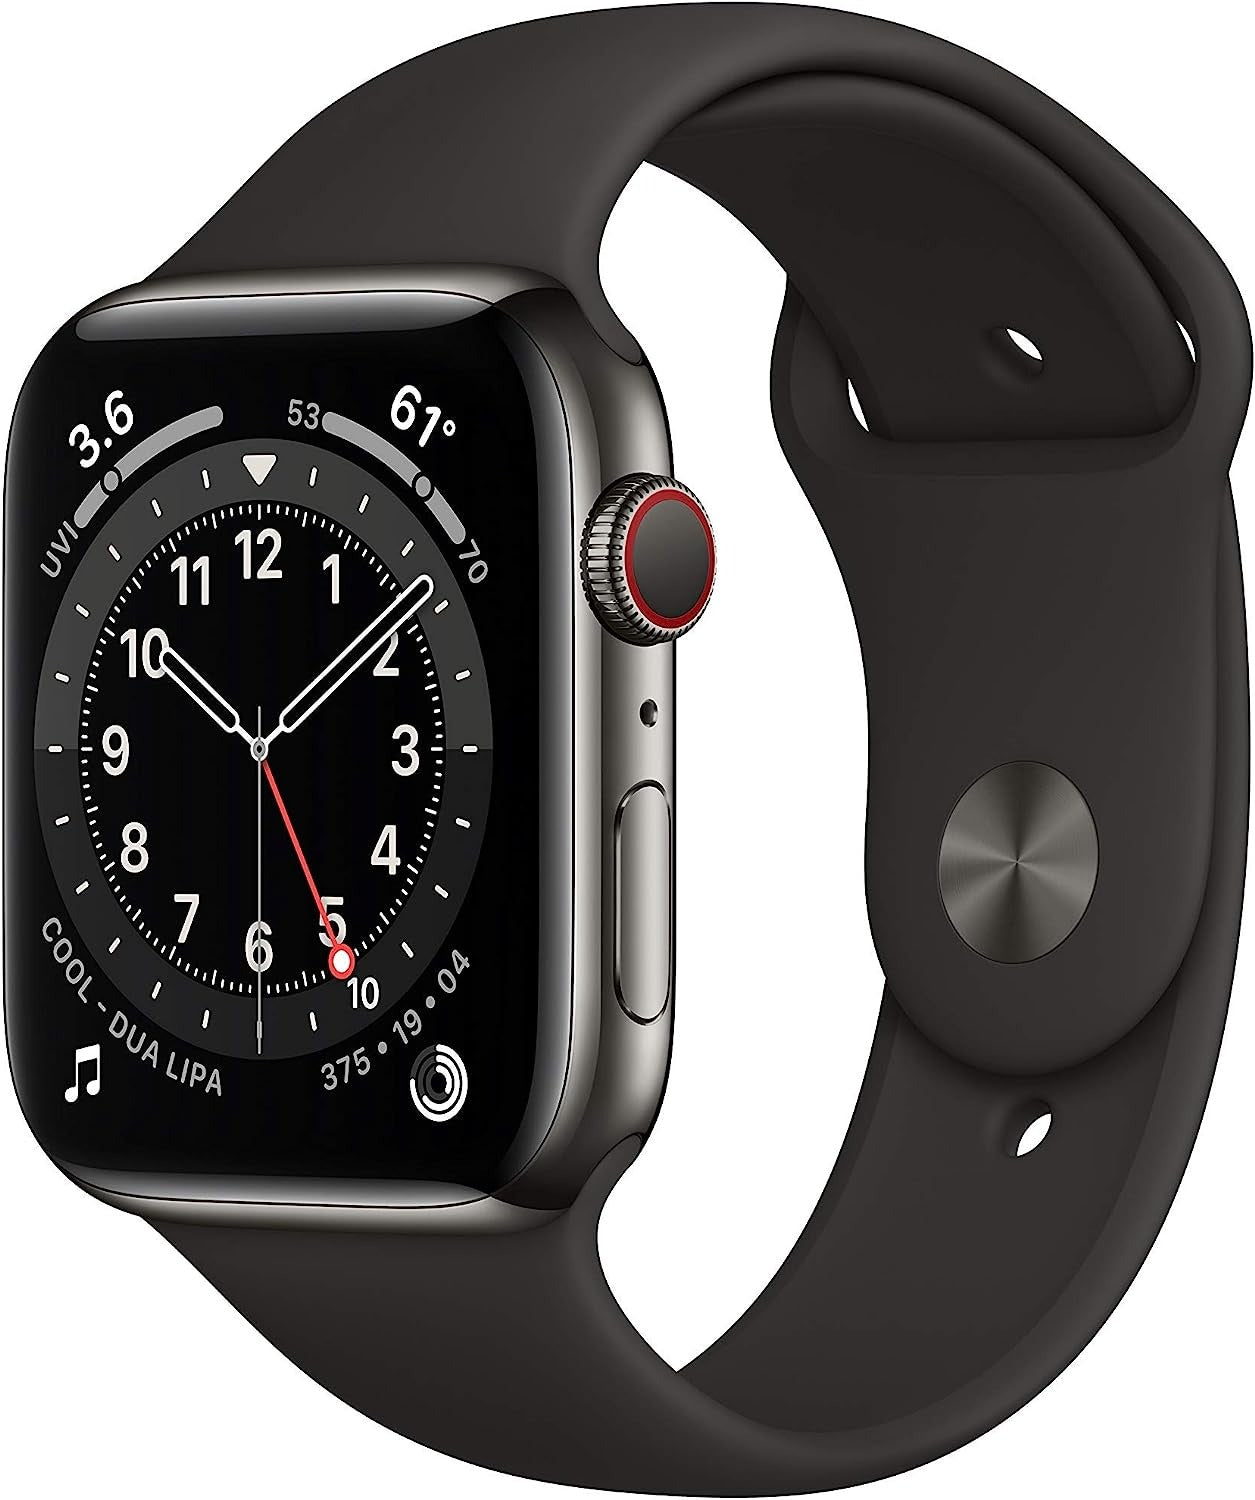 Apple Watch Series 6 (2020) 44mm GPS + Cellular - Graphite Stainless Steel Case &amp; Black Sport Band (Used)